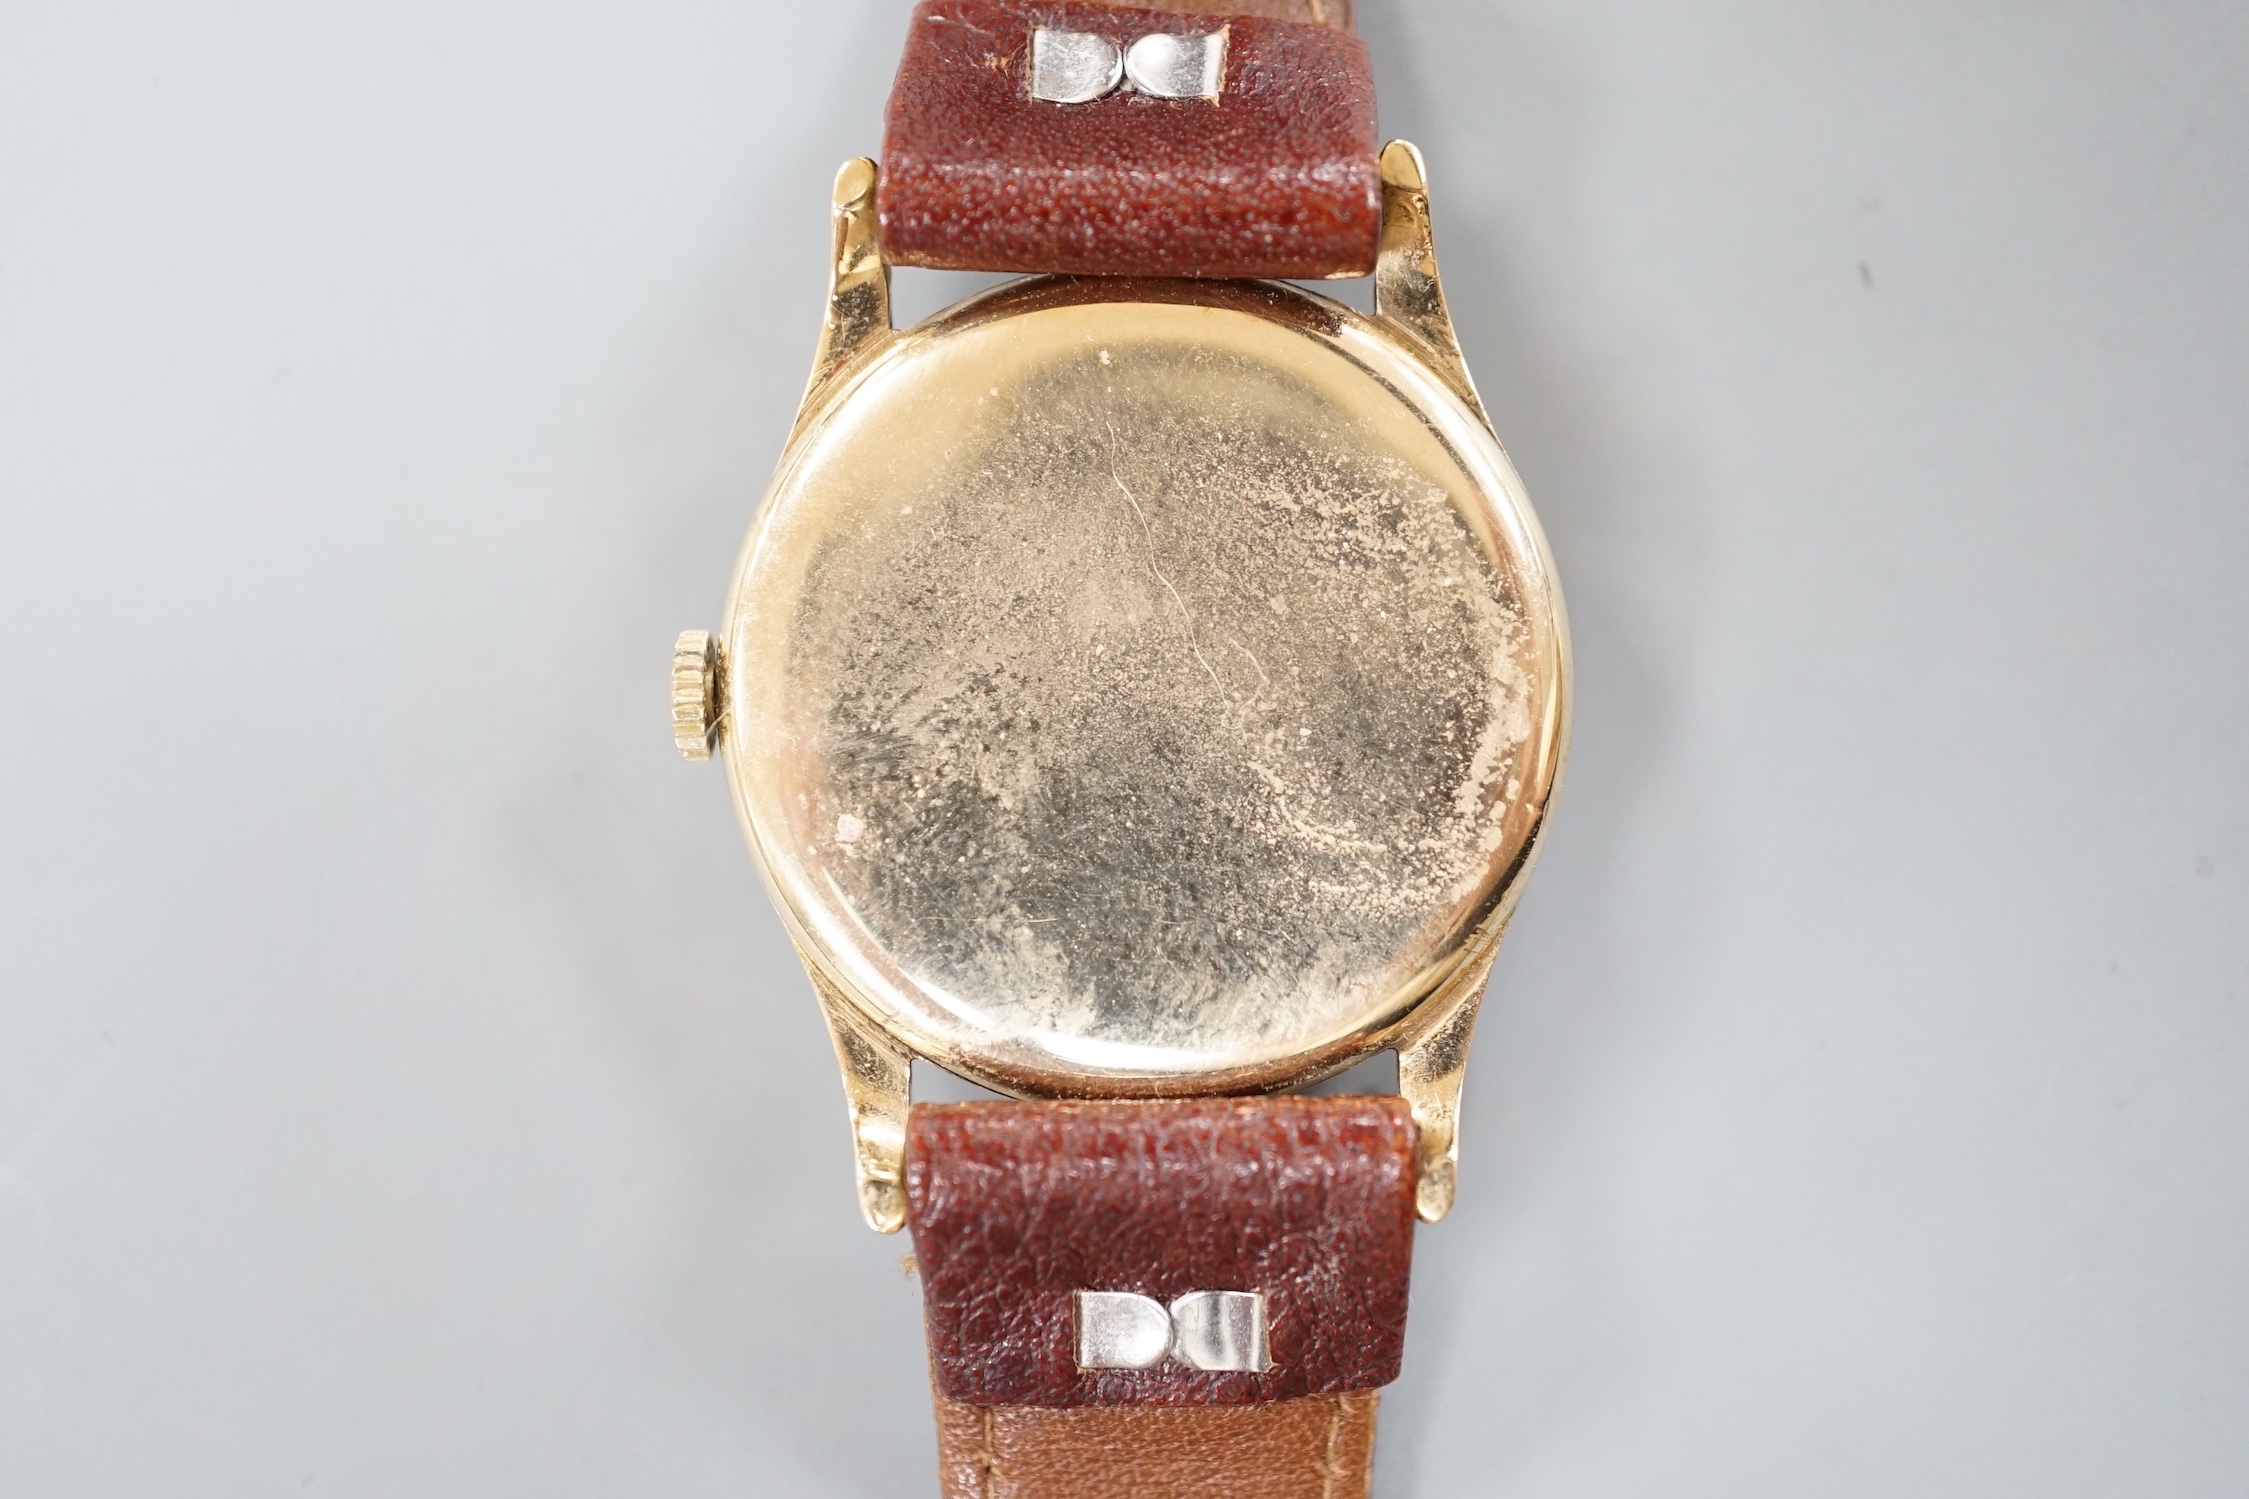 A gentleman's 9ct gold Record manual wind wrist watch, on a brown leather strap, case diameter 32mm